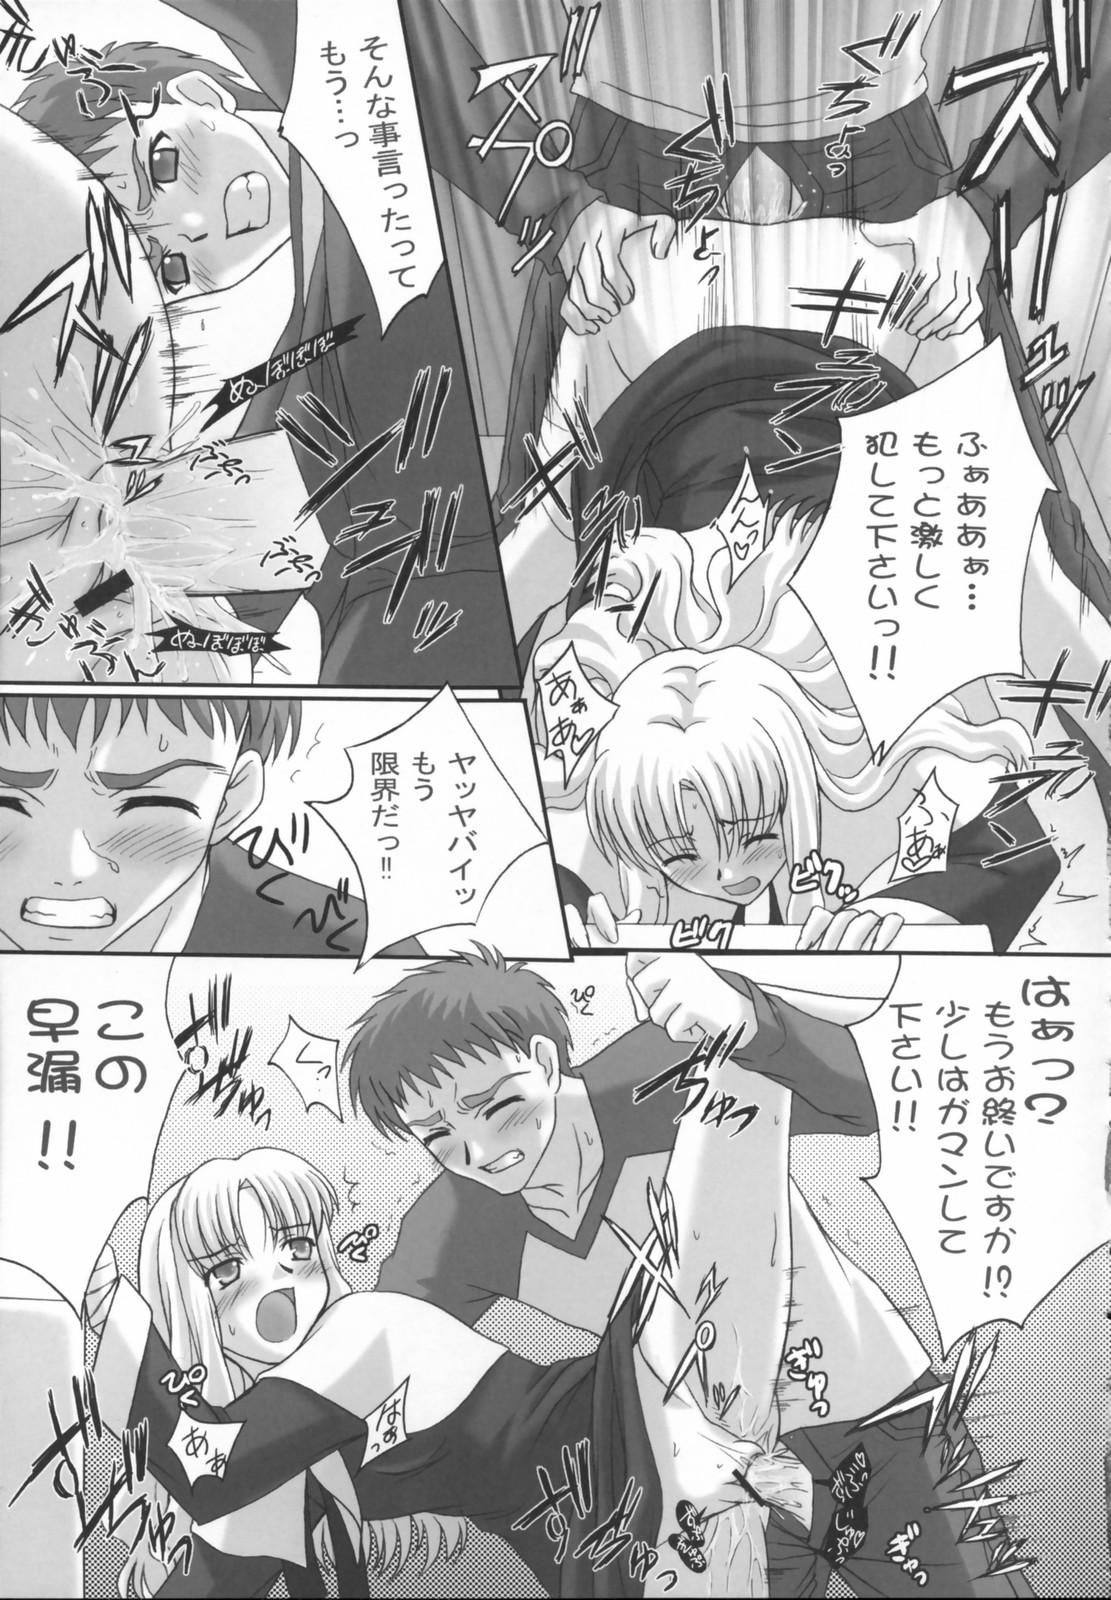 Defloration Madness of sister - Fate hollow ataraxia Tinder - Page 10